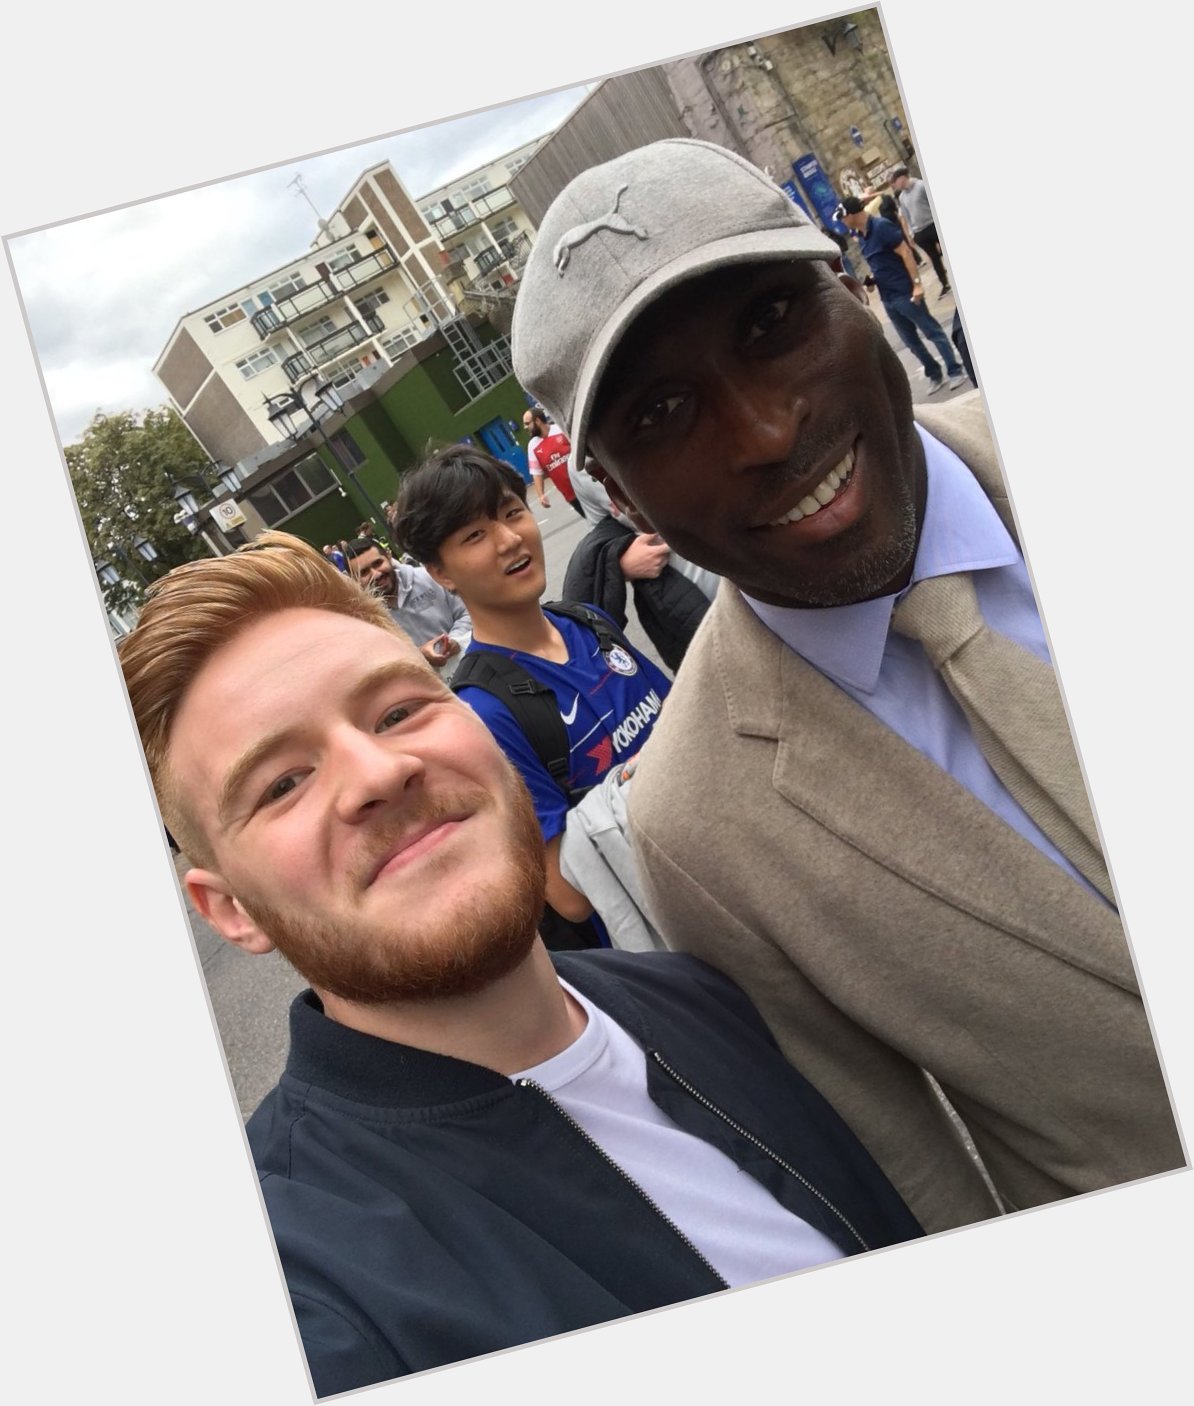 I never realised I have the same birthday as Sol Campbell, happy birthday to us big man x 